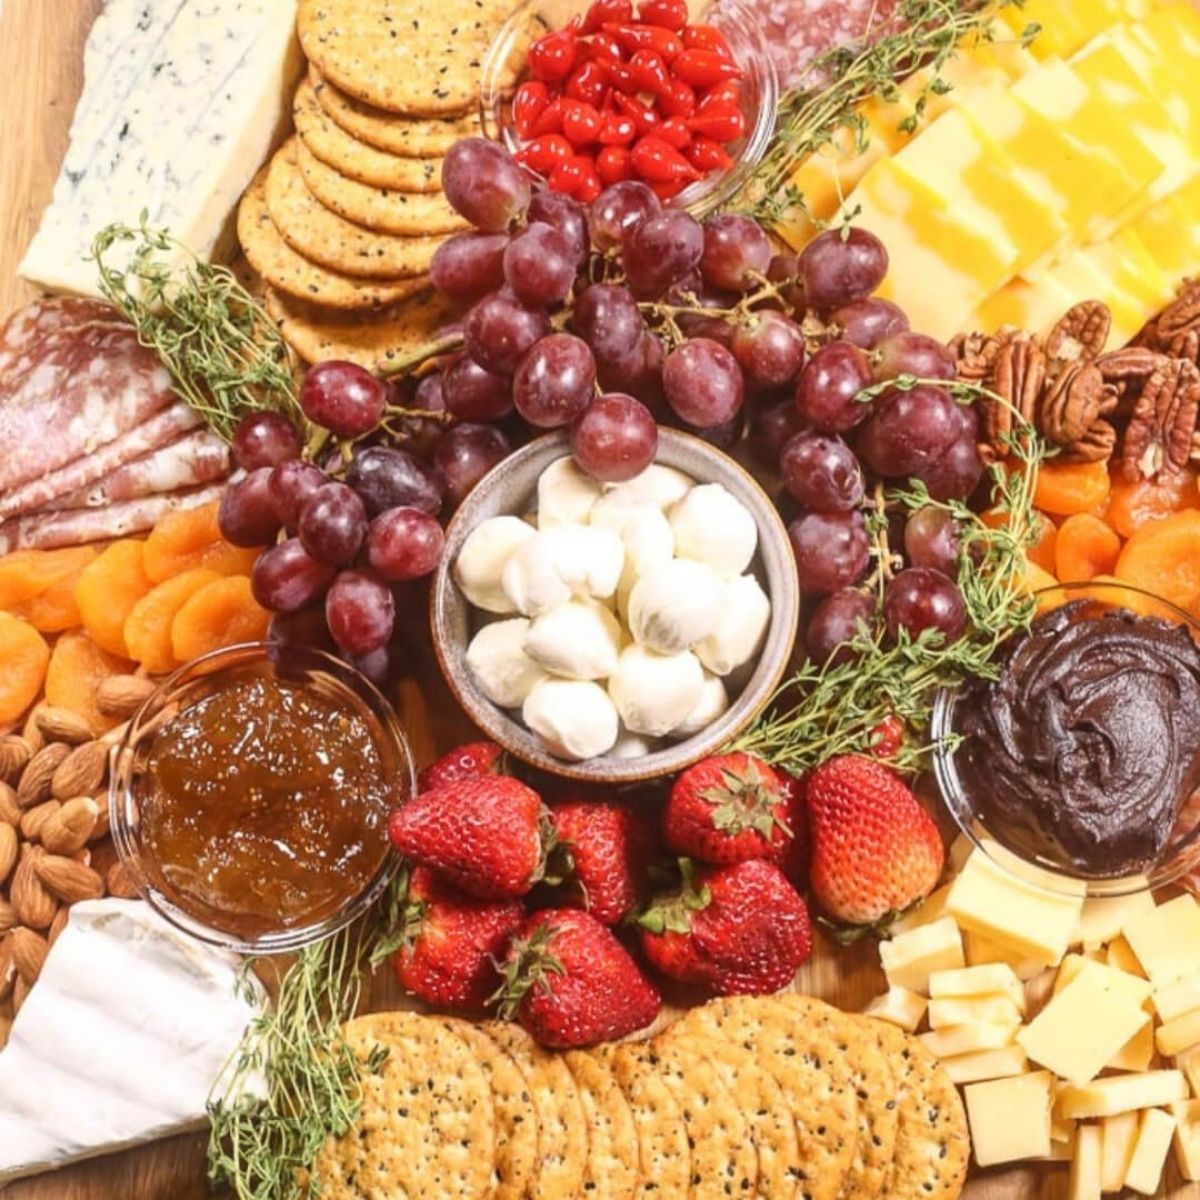 A recipe index featuring a charcuterie board with an assortment of cheeses, cured meats, nuts, fruits, crackers, and dips, arranged decoratively.